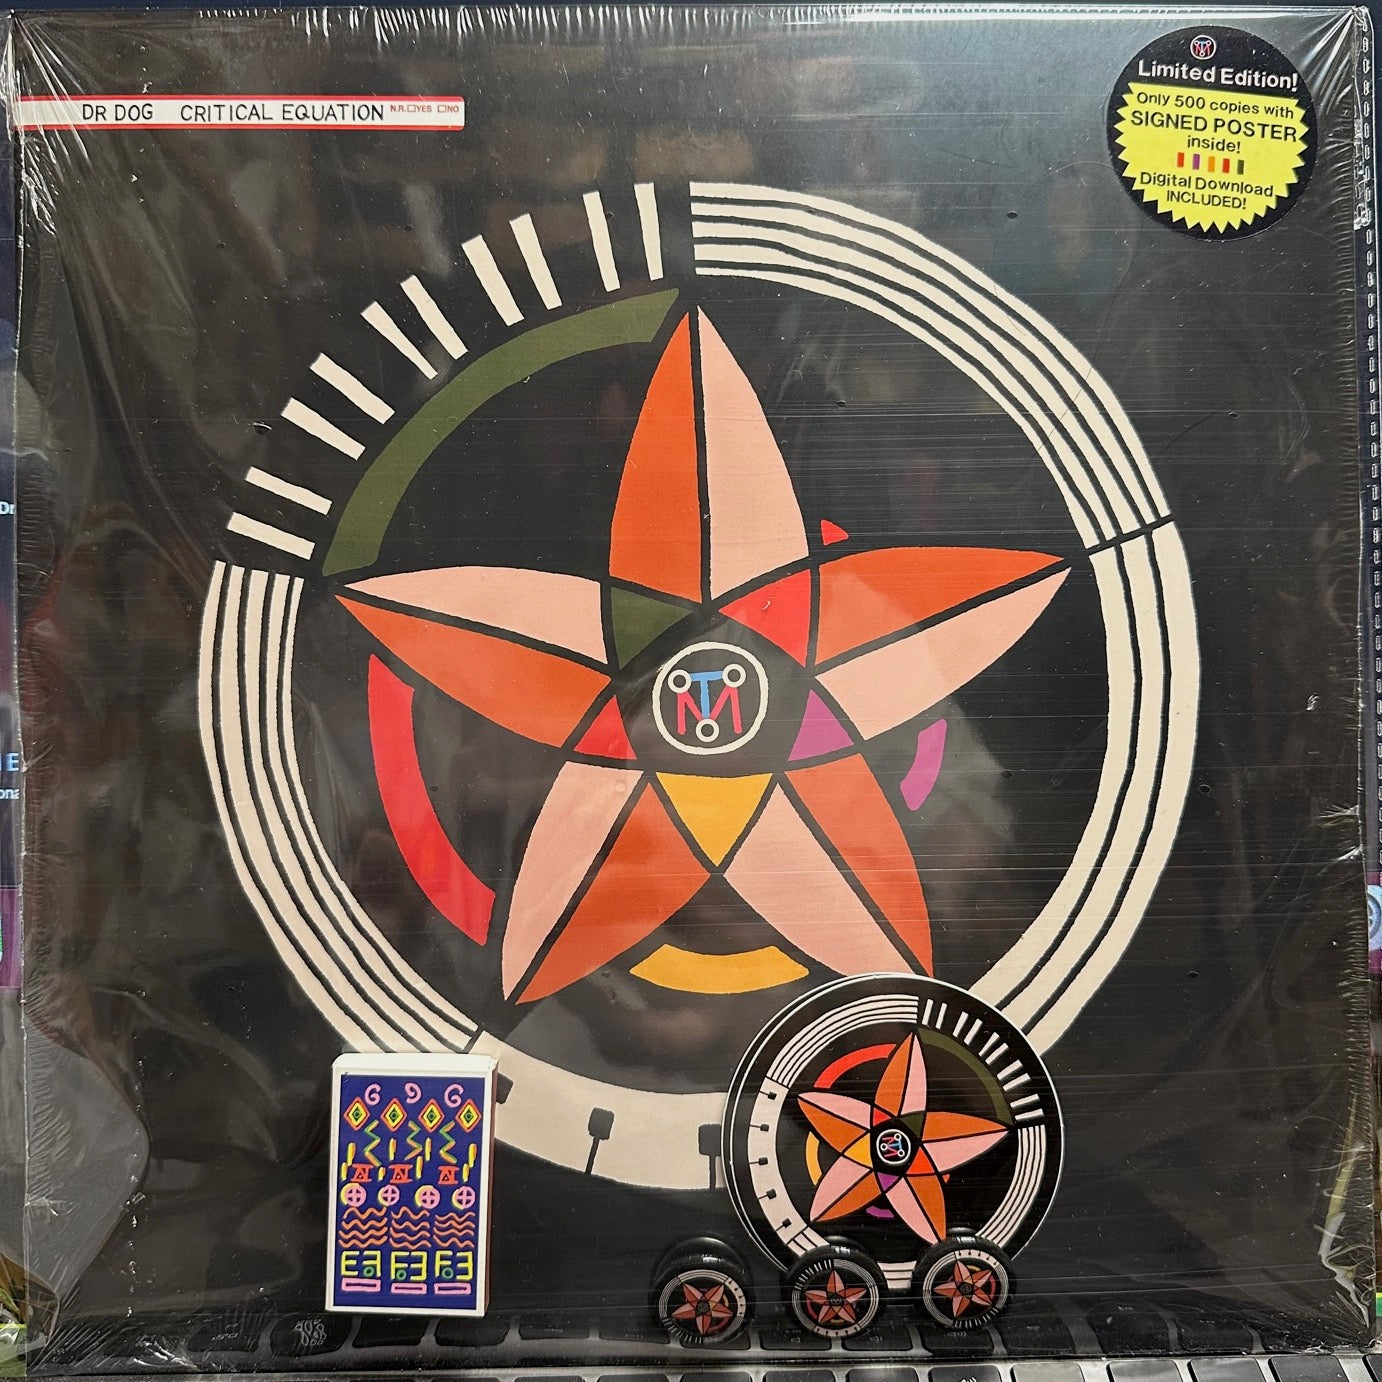 Dr. Dog - Critical Equation - New LP Record 2018 We Buy Gold Indie Exclusive Vinyl, Signed Poster, Buttons, Matches, Stickers - Indie Rock